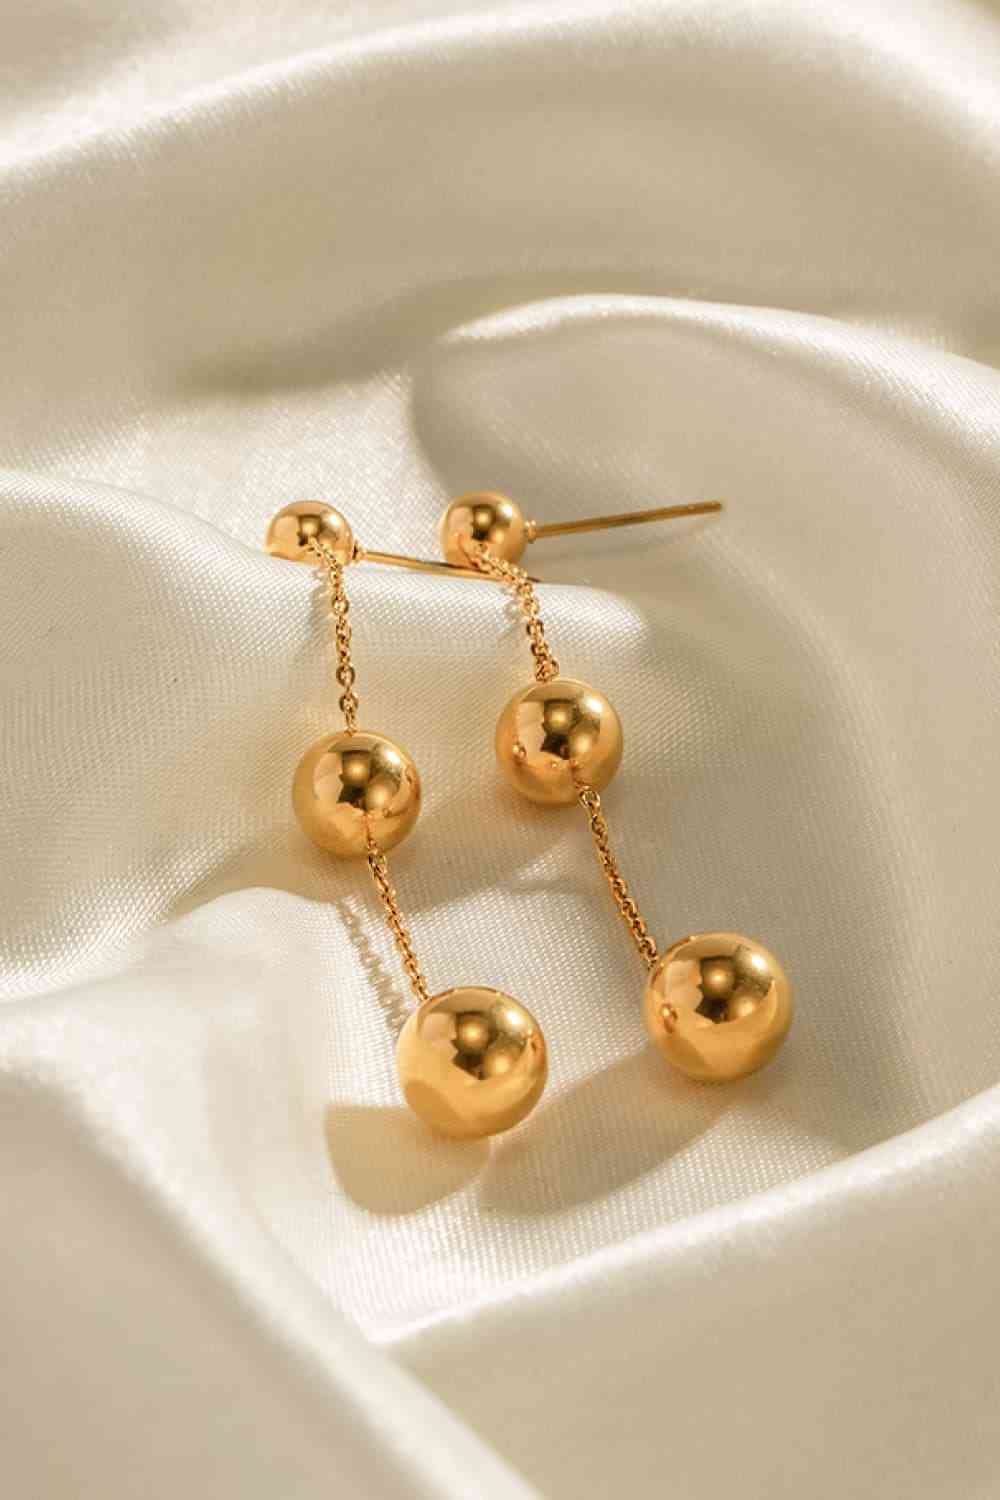 Ball Bead and Chain Stainless Steel Earrings